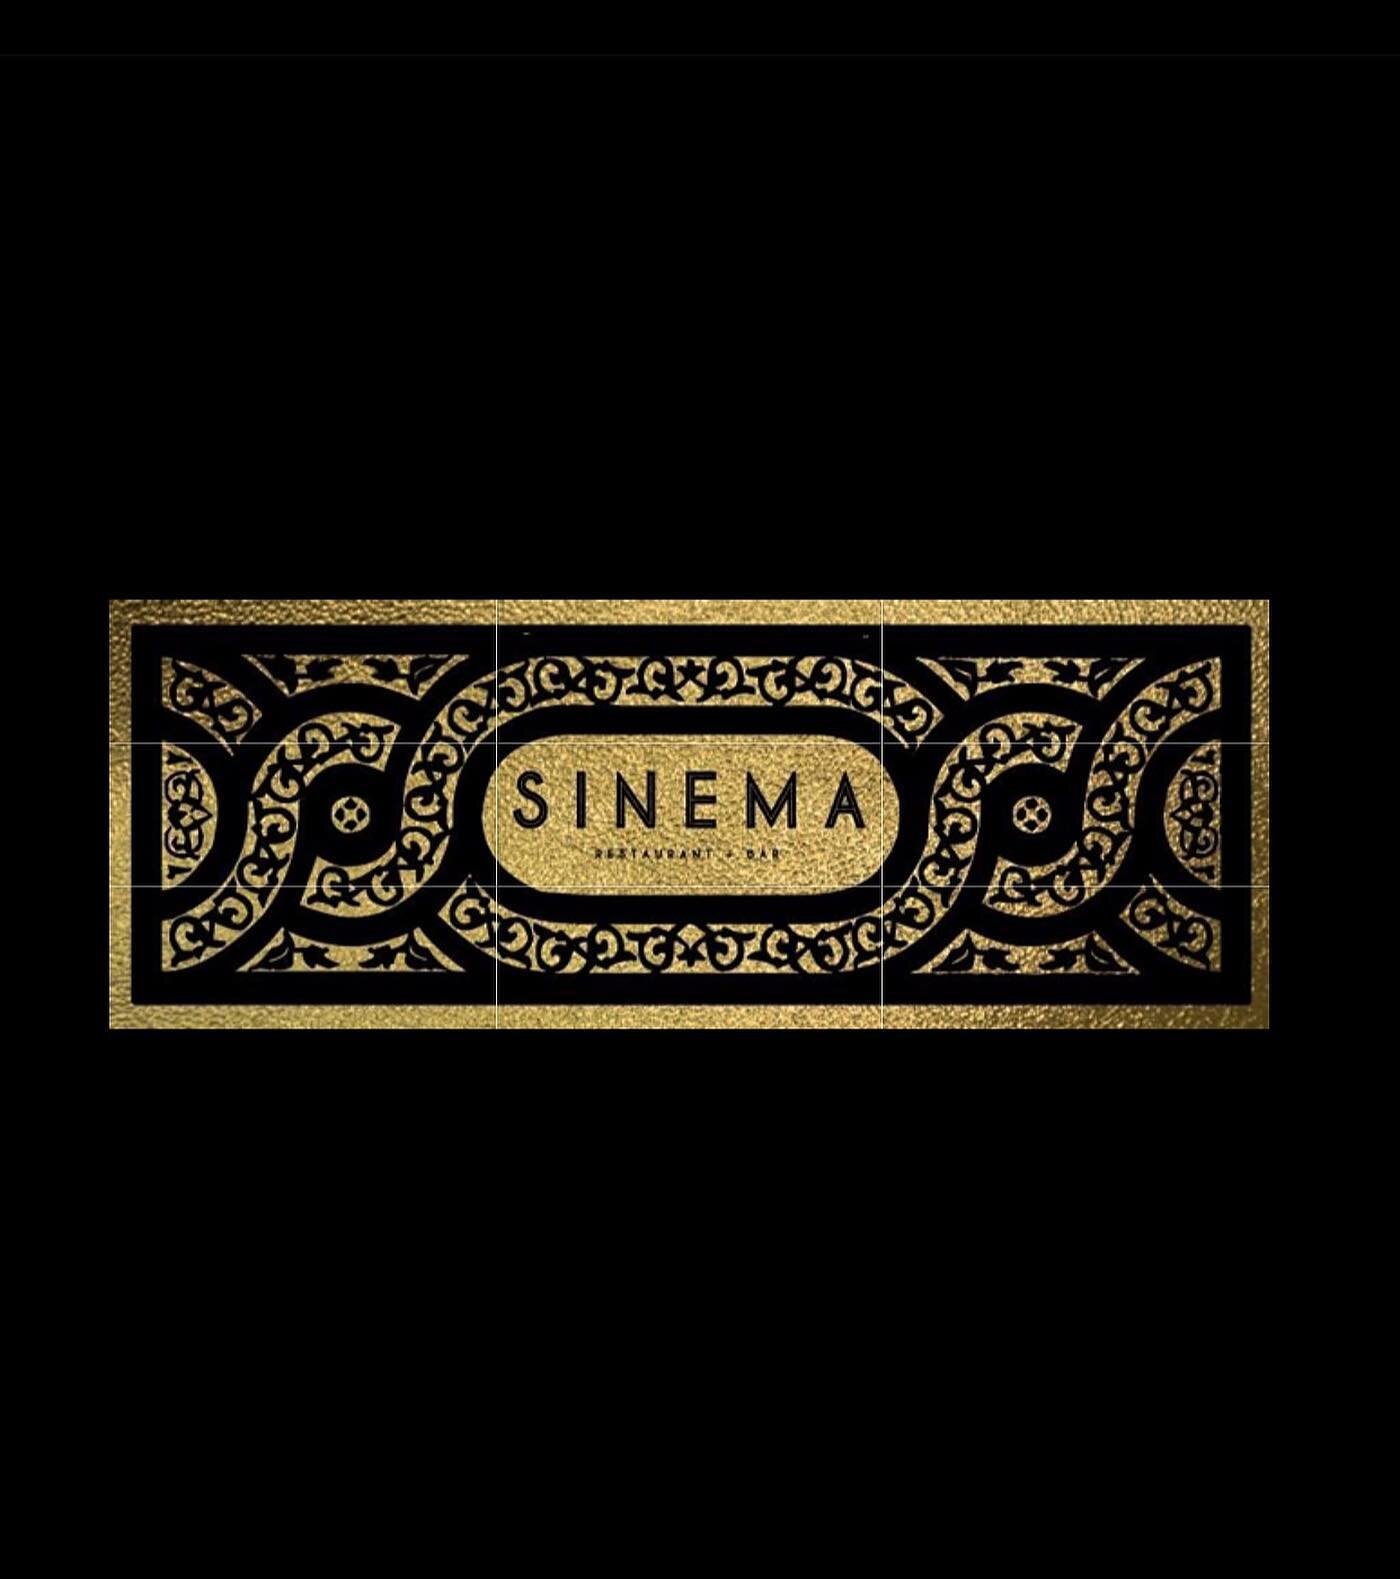 Sinema Restaurant &amp; Bar located in the Melrose Theater at 2600 Franklin Pike.